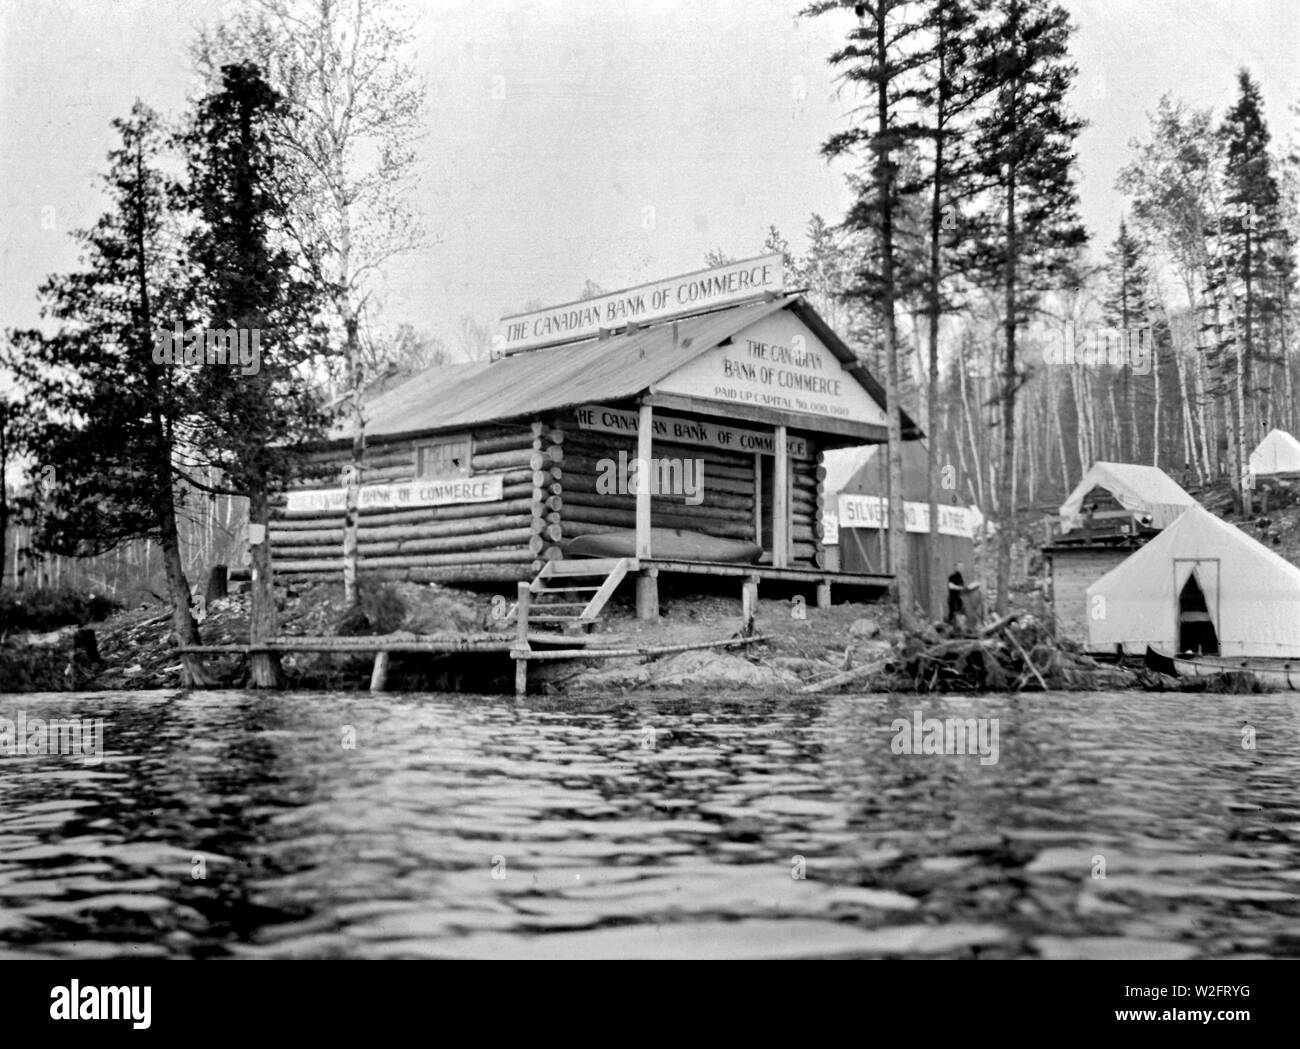 View of the Canadian Bank of Commerce building in Gowganda, taken from the lake. The bank was built of logs and there is a canoe on the bank's veranda ca. 1909 Stock Photo